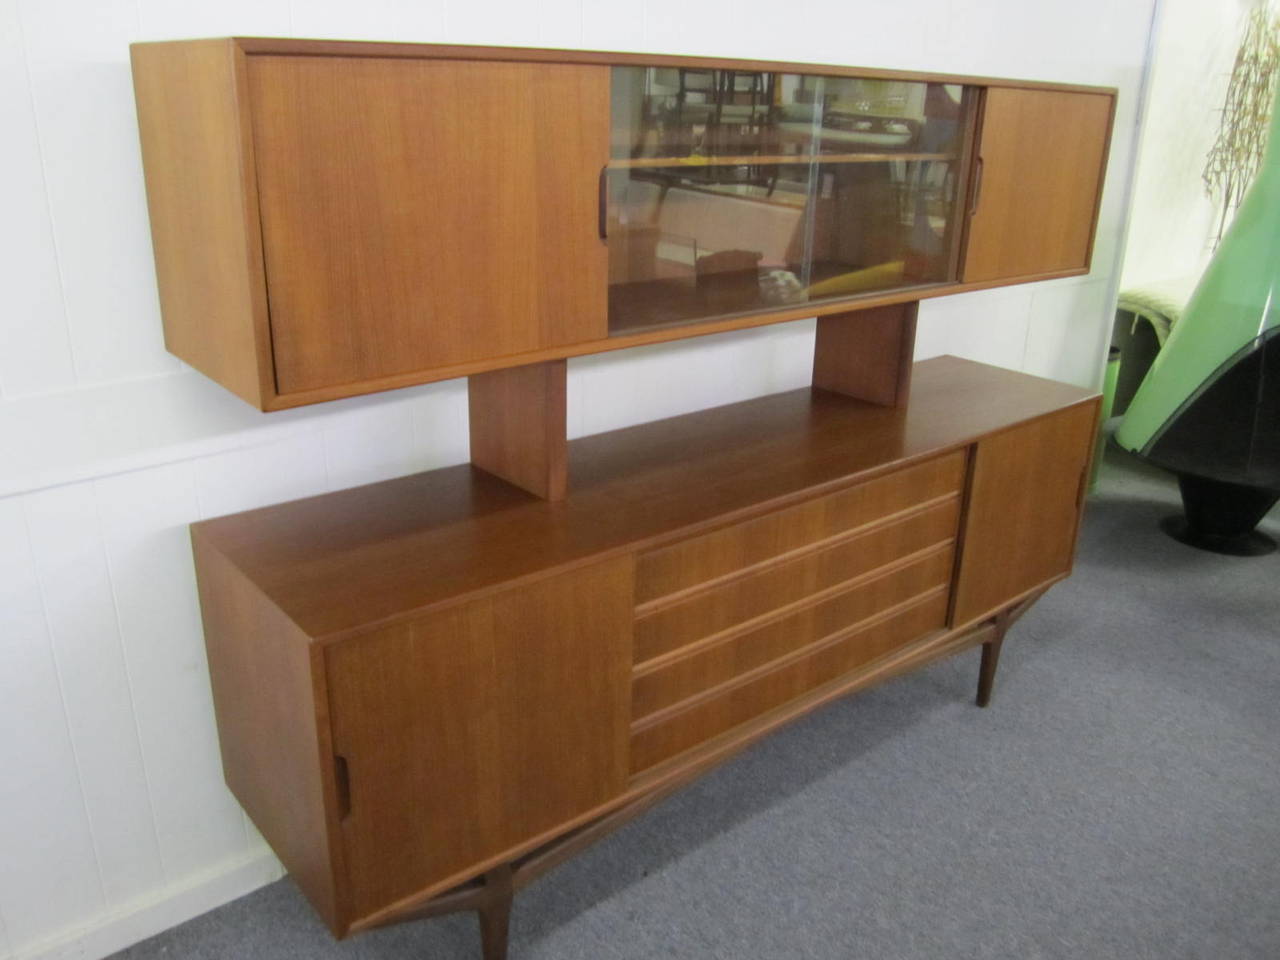 Gorgeous Danish modern teak credenza with floating hutch. This magnificent piece is finished on both sides so it can be used as a room divider. Tons of storage options with sliding doors and drawers. Perfect to divide up an open floor plans into